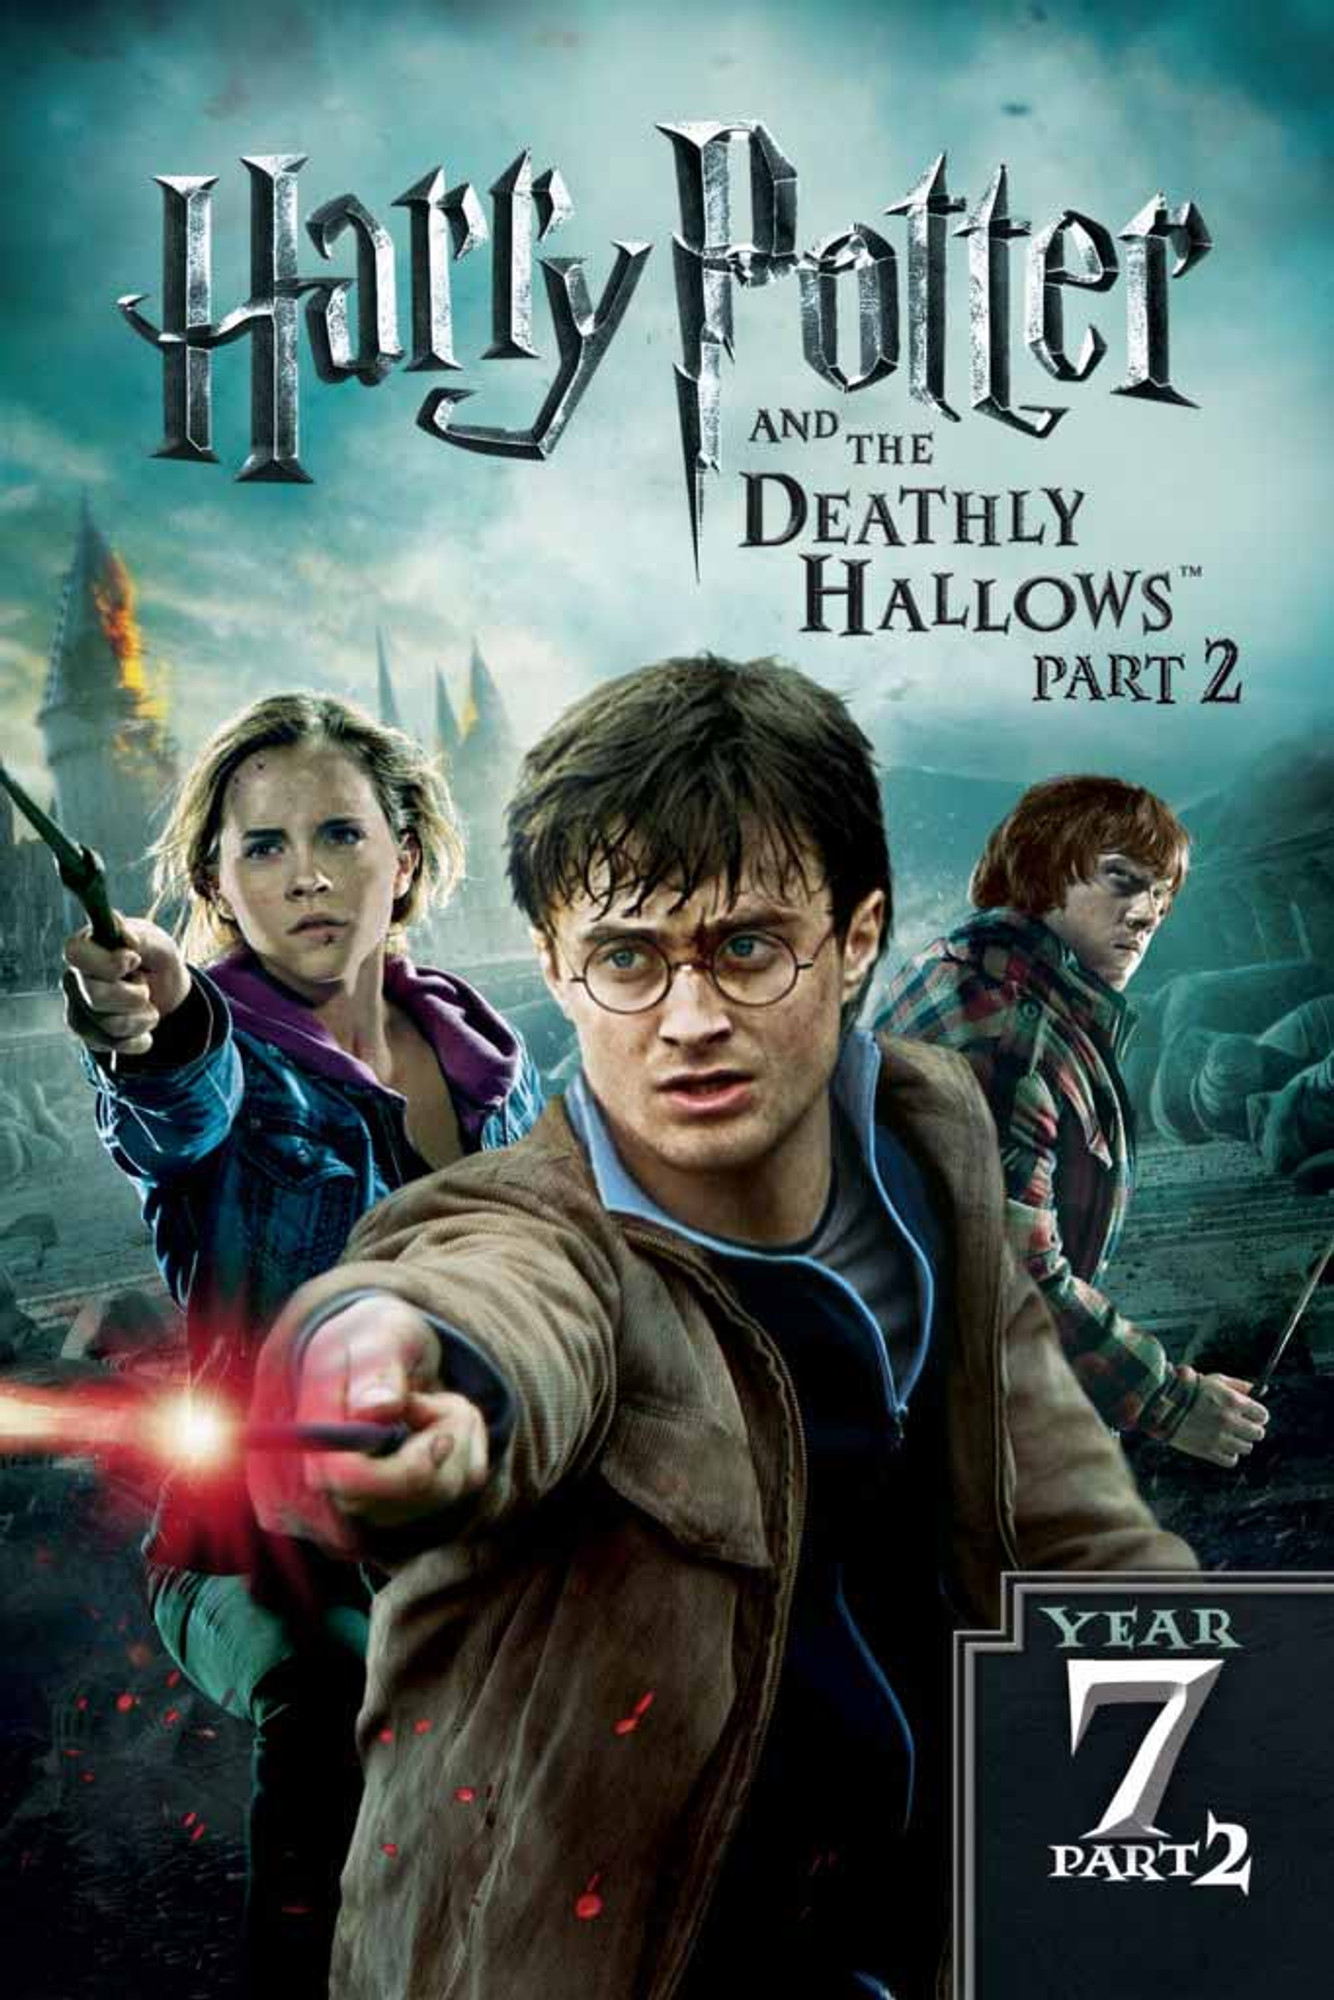 harry potter and the deathly hallows part 2 fmovies download free